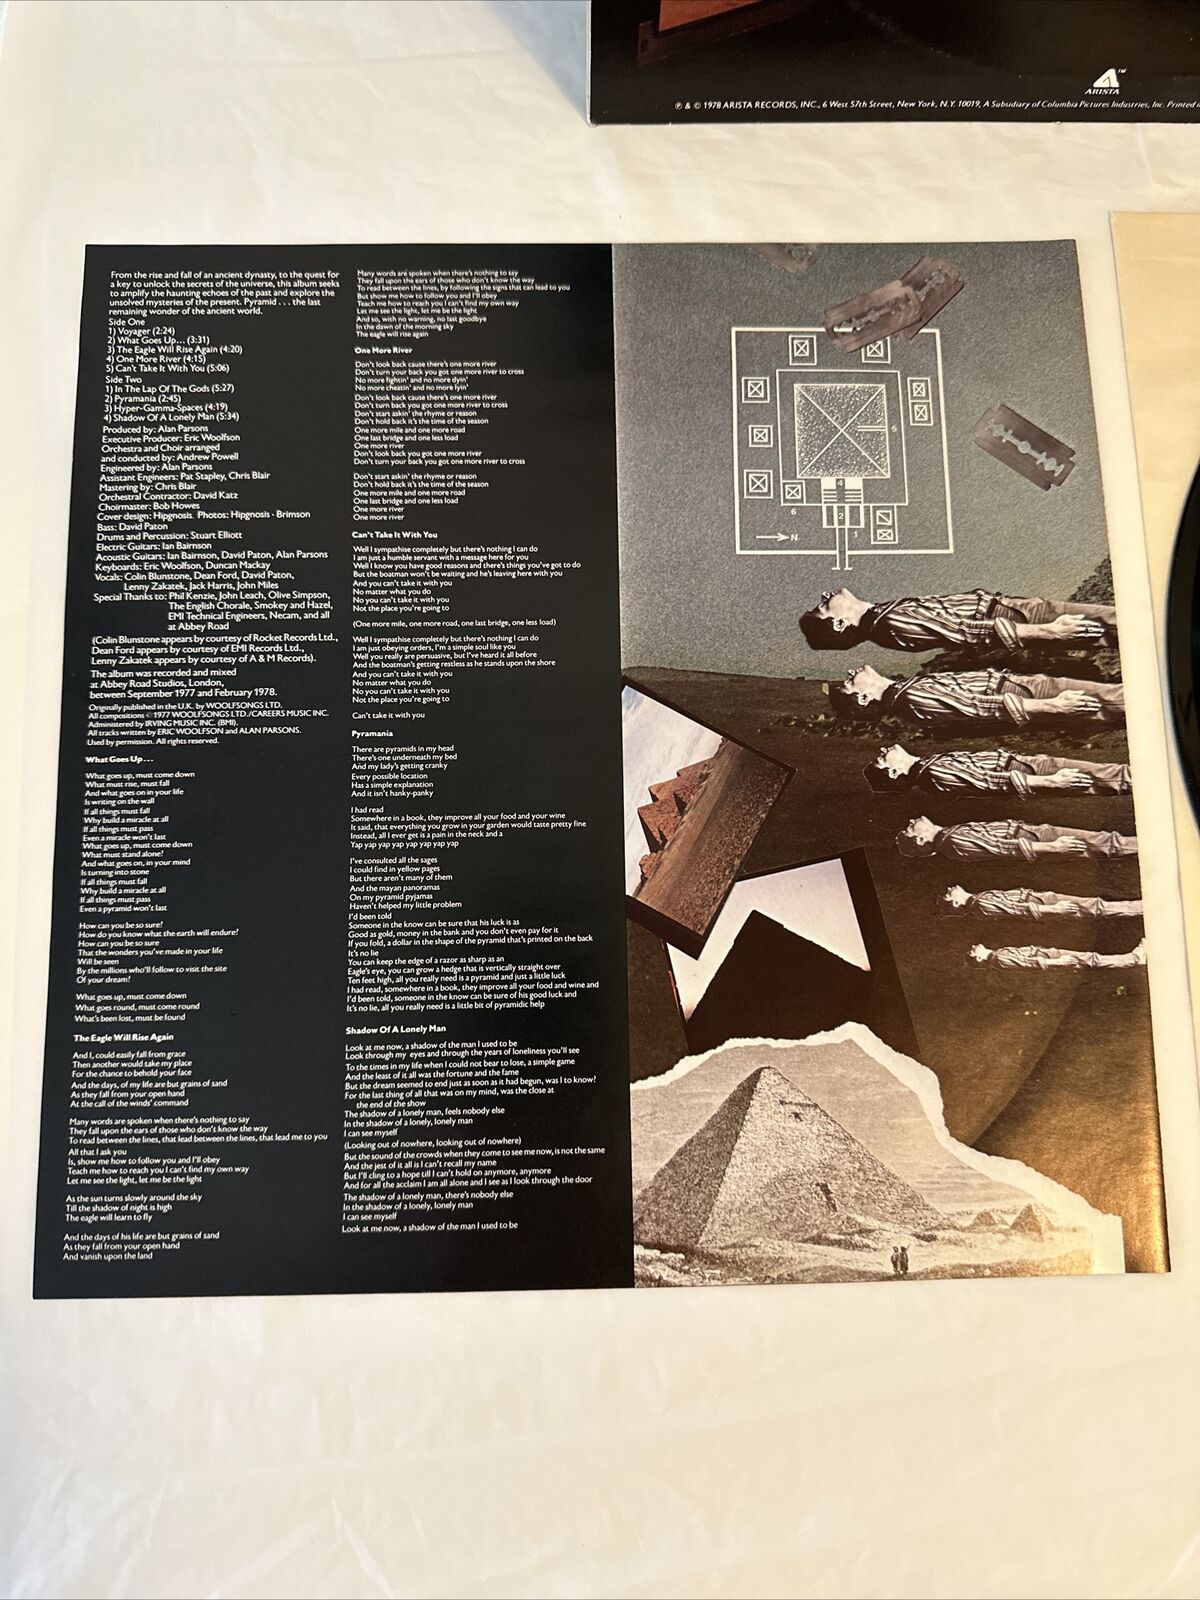 The Alan Parsons Project: PYRAMID Vinyl LP 1978 Arista AB 4180 With Poster EX/NM